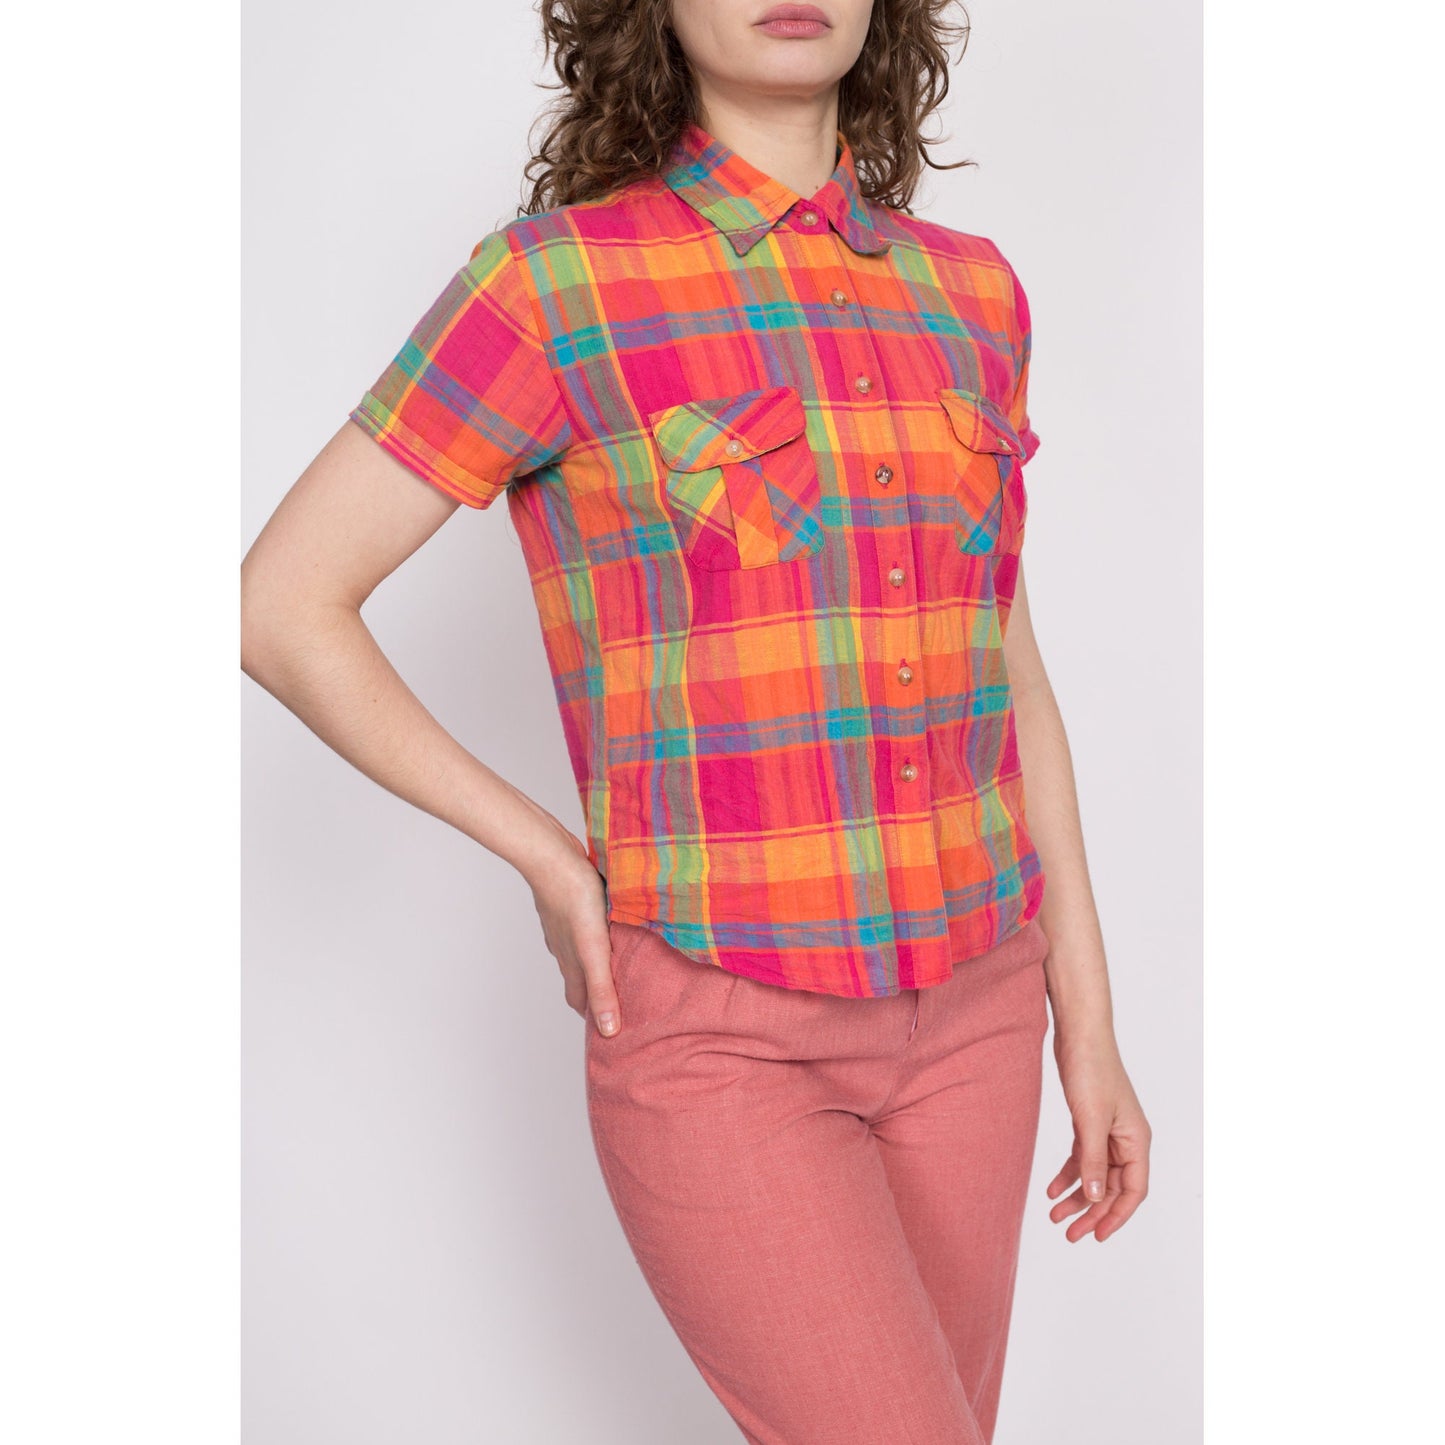 90s Pink Plaid Cotton Button Up Shirt - Medium | Vintage Colorful Short Sleeve Collared Top